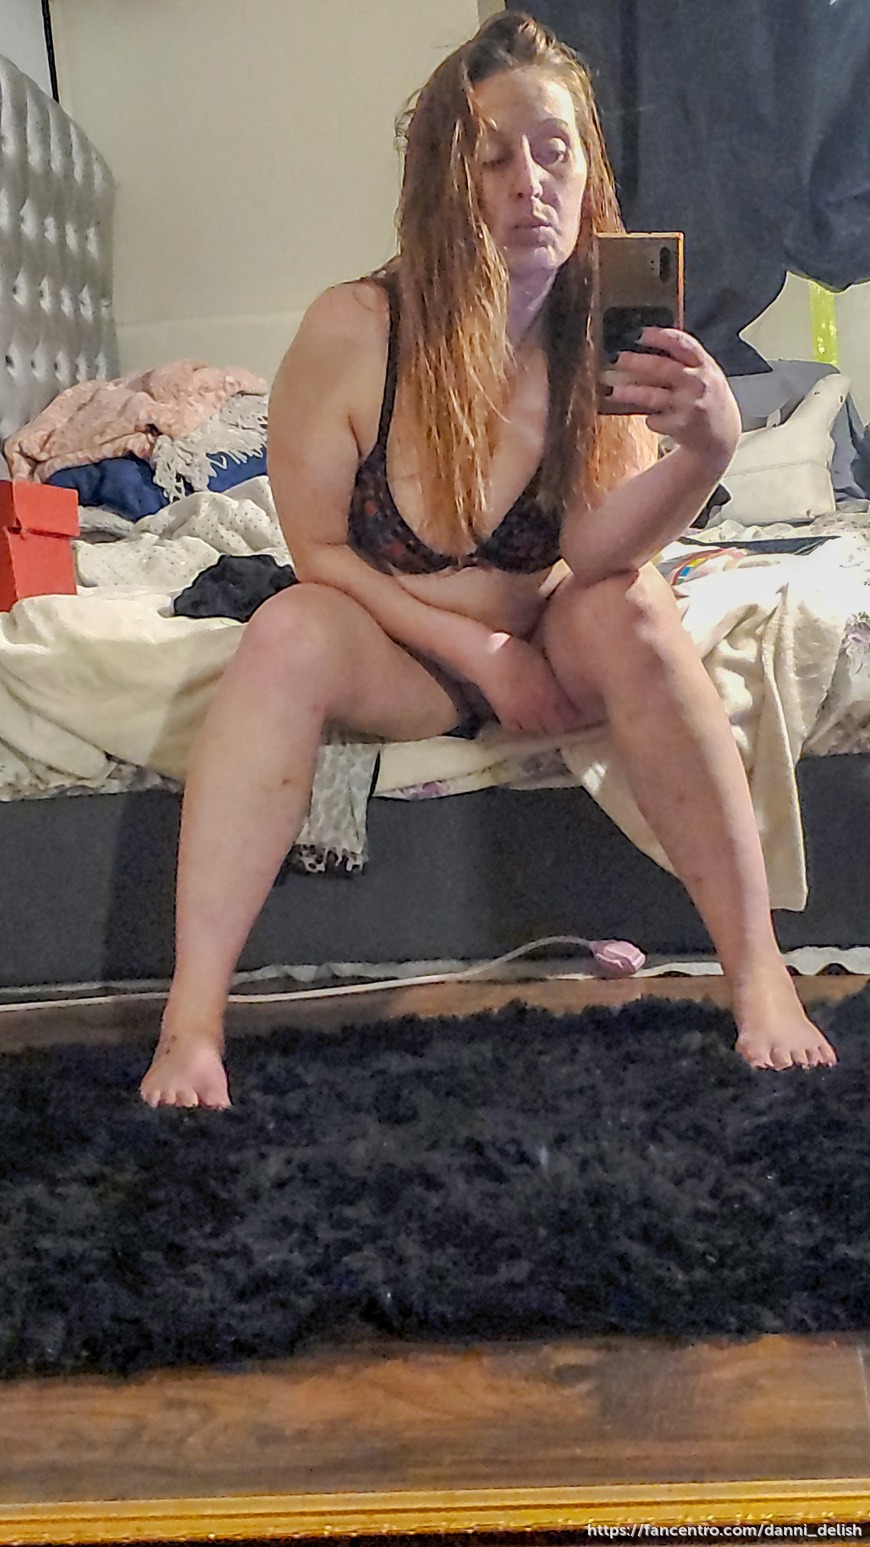 So I was taking a few pics of myself in the mirror and ended up feelin' myself so much I shot a clip to show you just how much! - post image 1